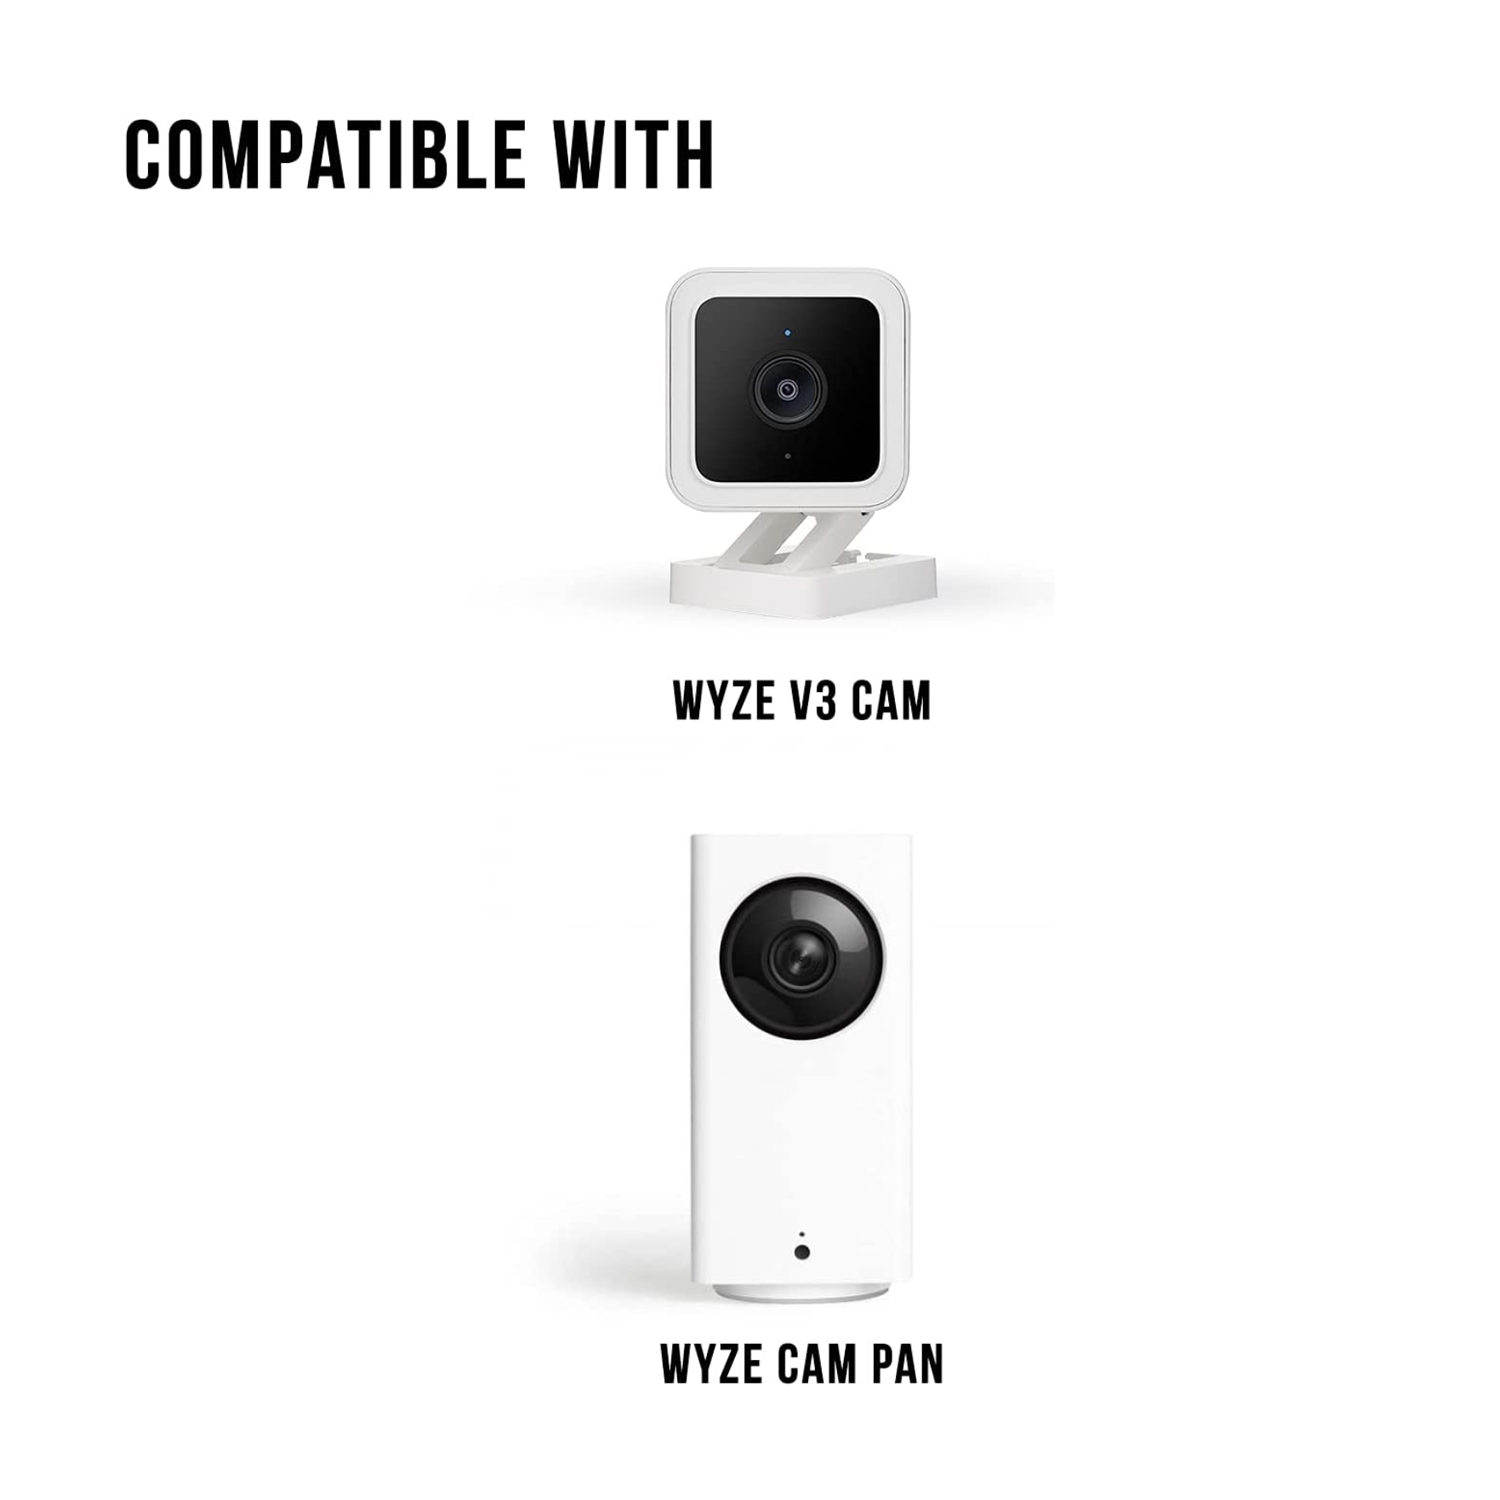 Wasserstein PoE Adapter for Wyze Cam V3/Outdoor - Continuously Power Your Security Cam with USB Ethernet Adapter